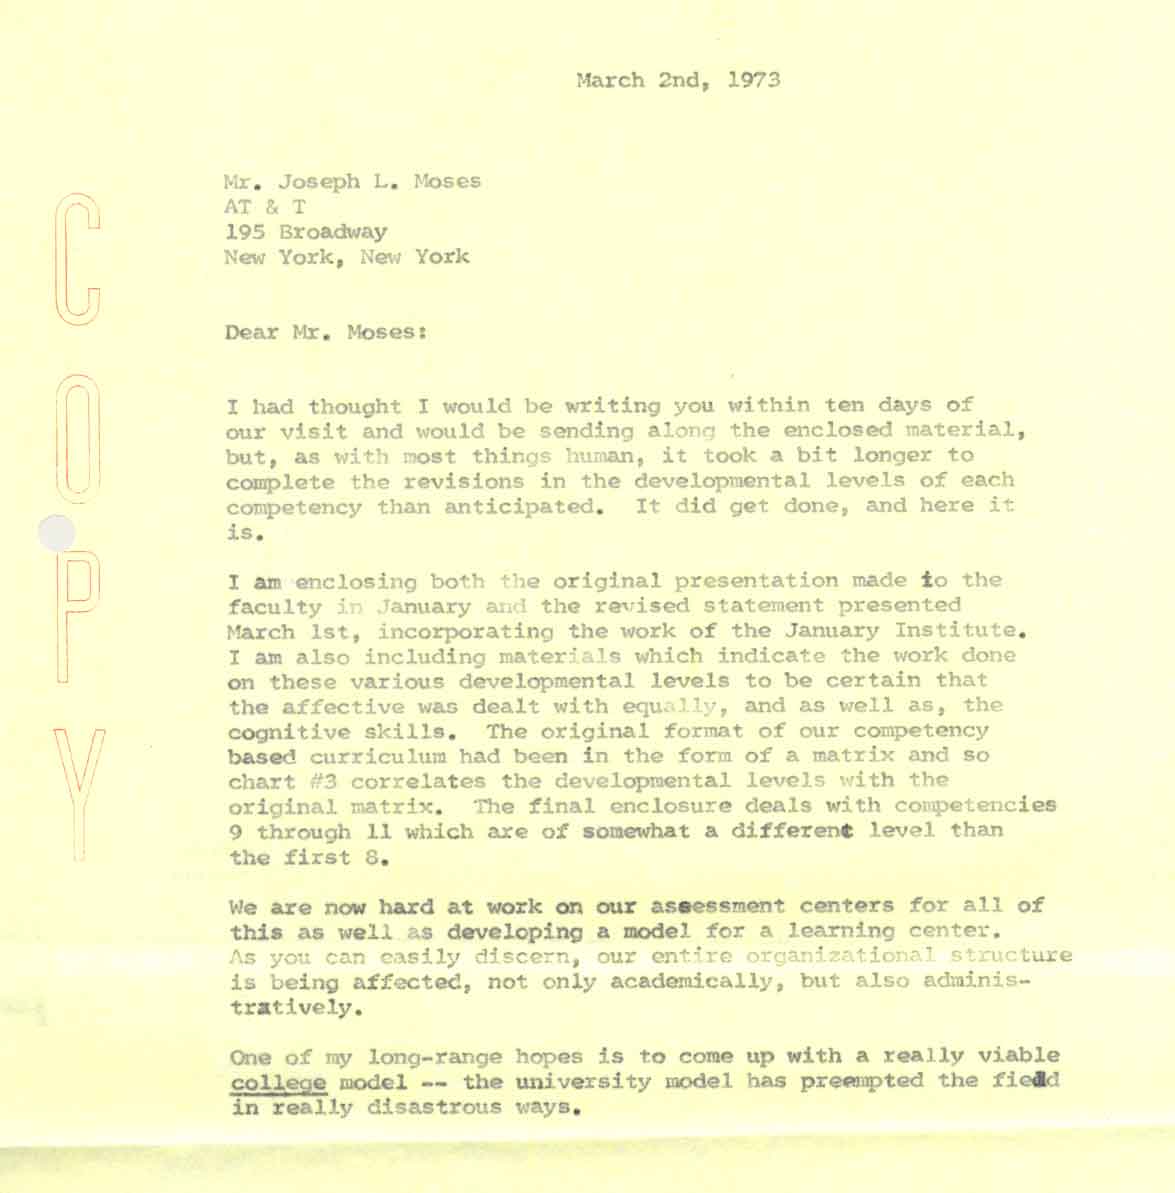 Letter about assessment from Sr. Joel Read to an AT&T employee in 1973, p1